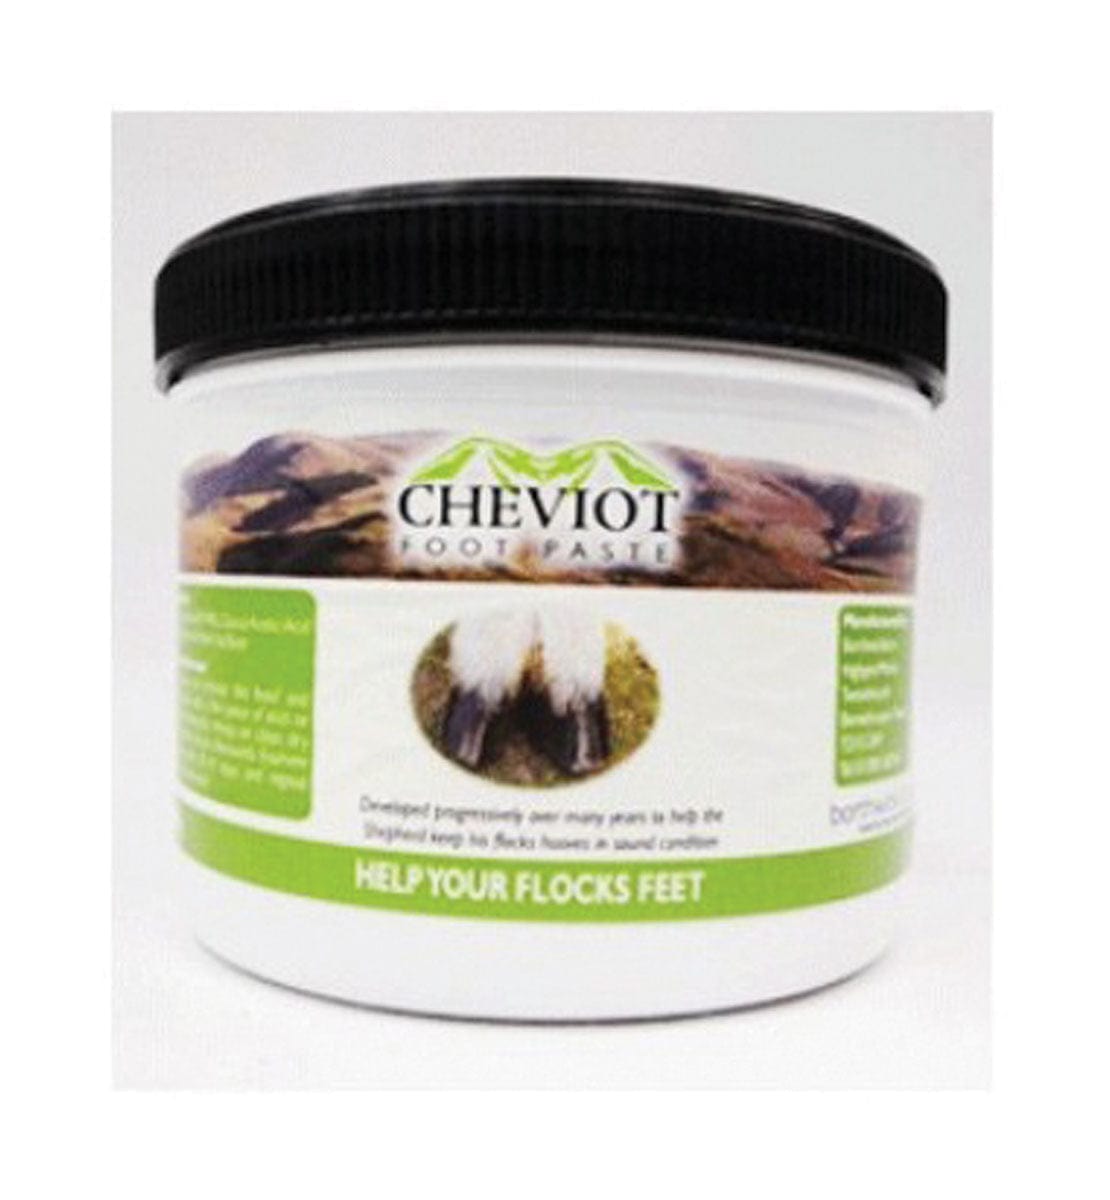 Cheviot foot rot paste